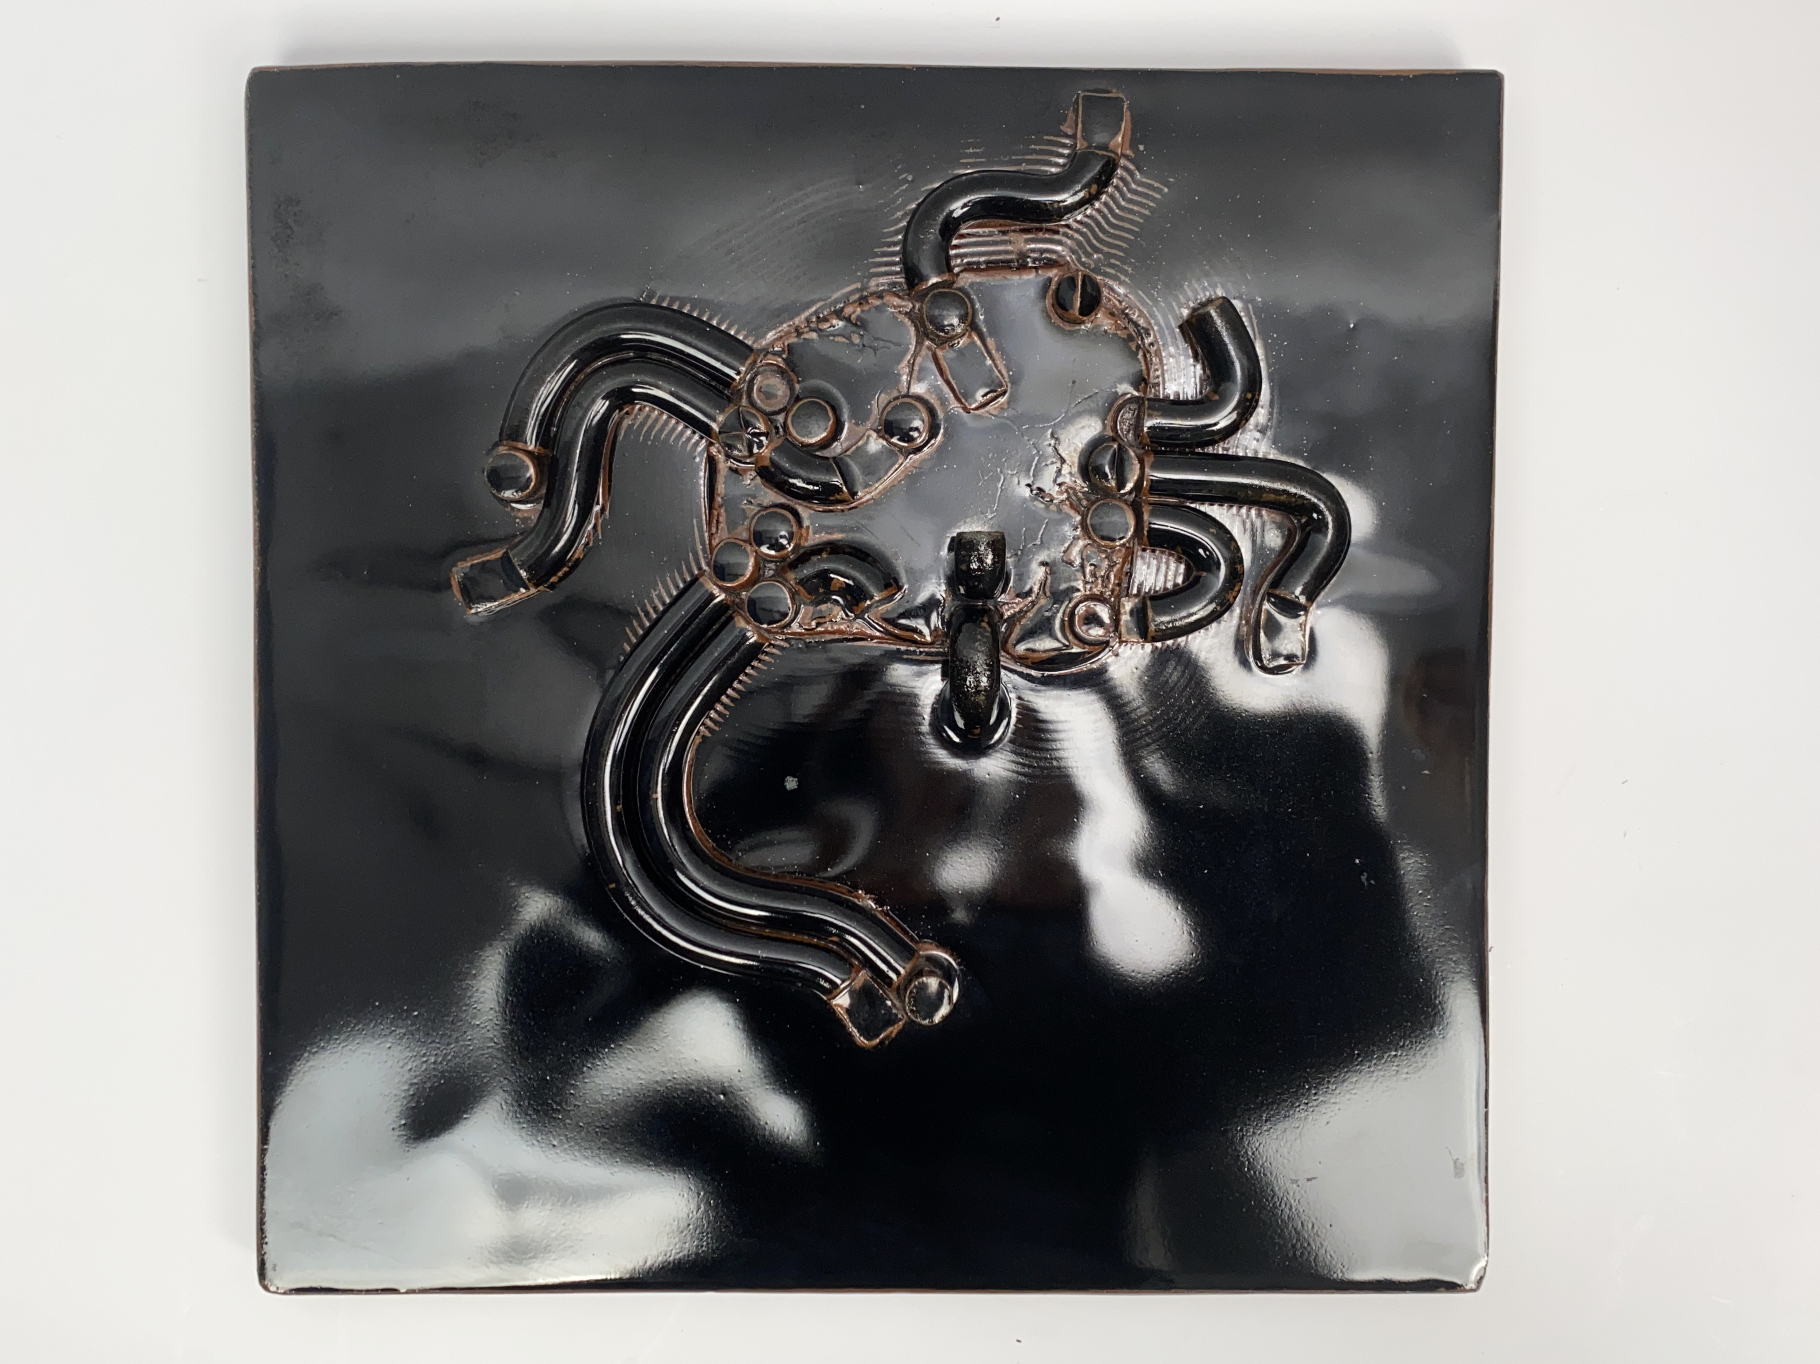 Relief Plate, Object, Ceramic, Stoneware, Unique Piece, assembled from formed Parts, black Iron Glaze, by Wilhelm & Elly Kuch, 1974